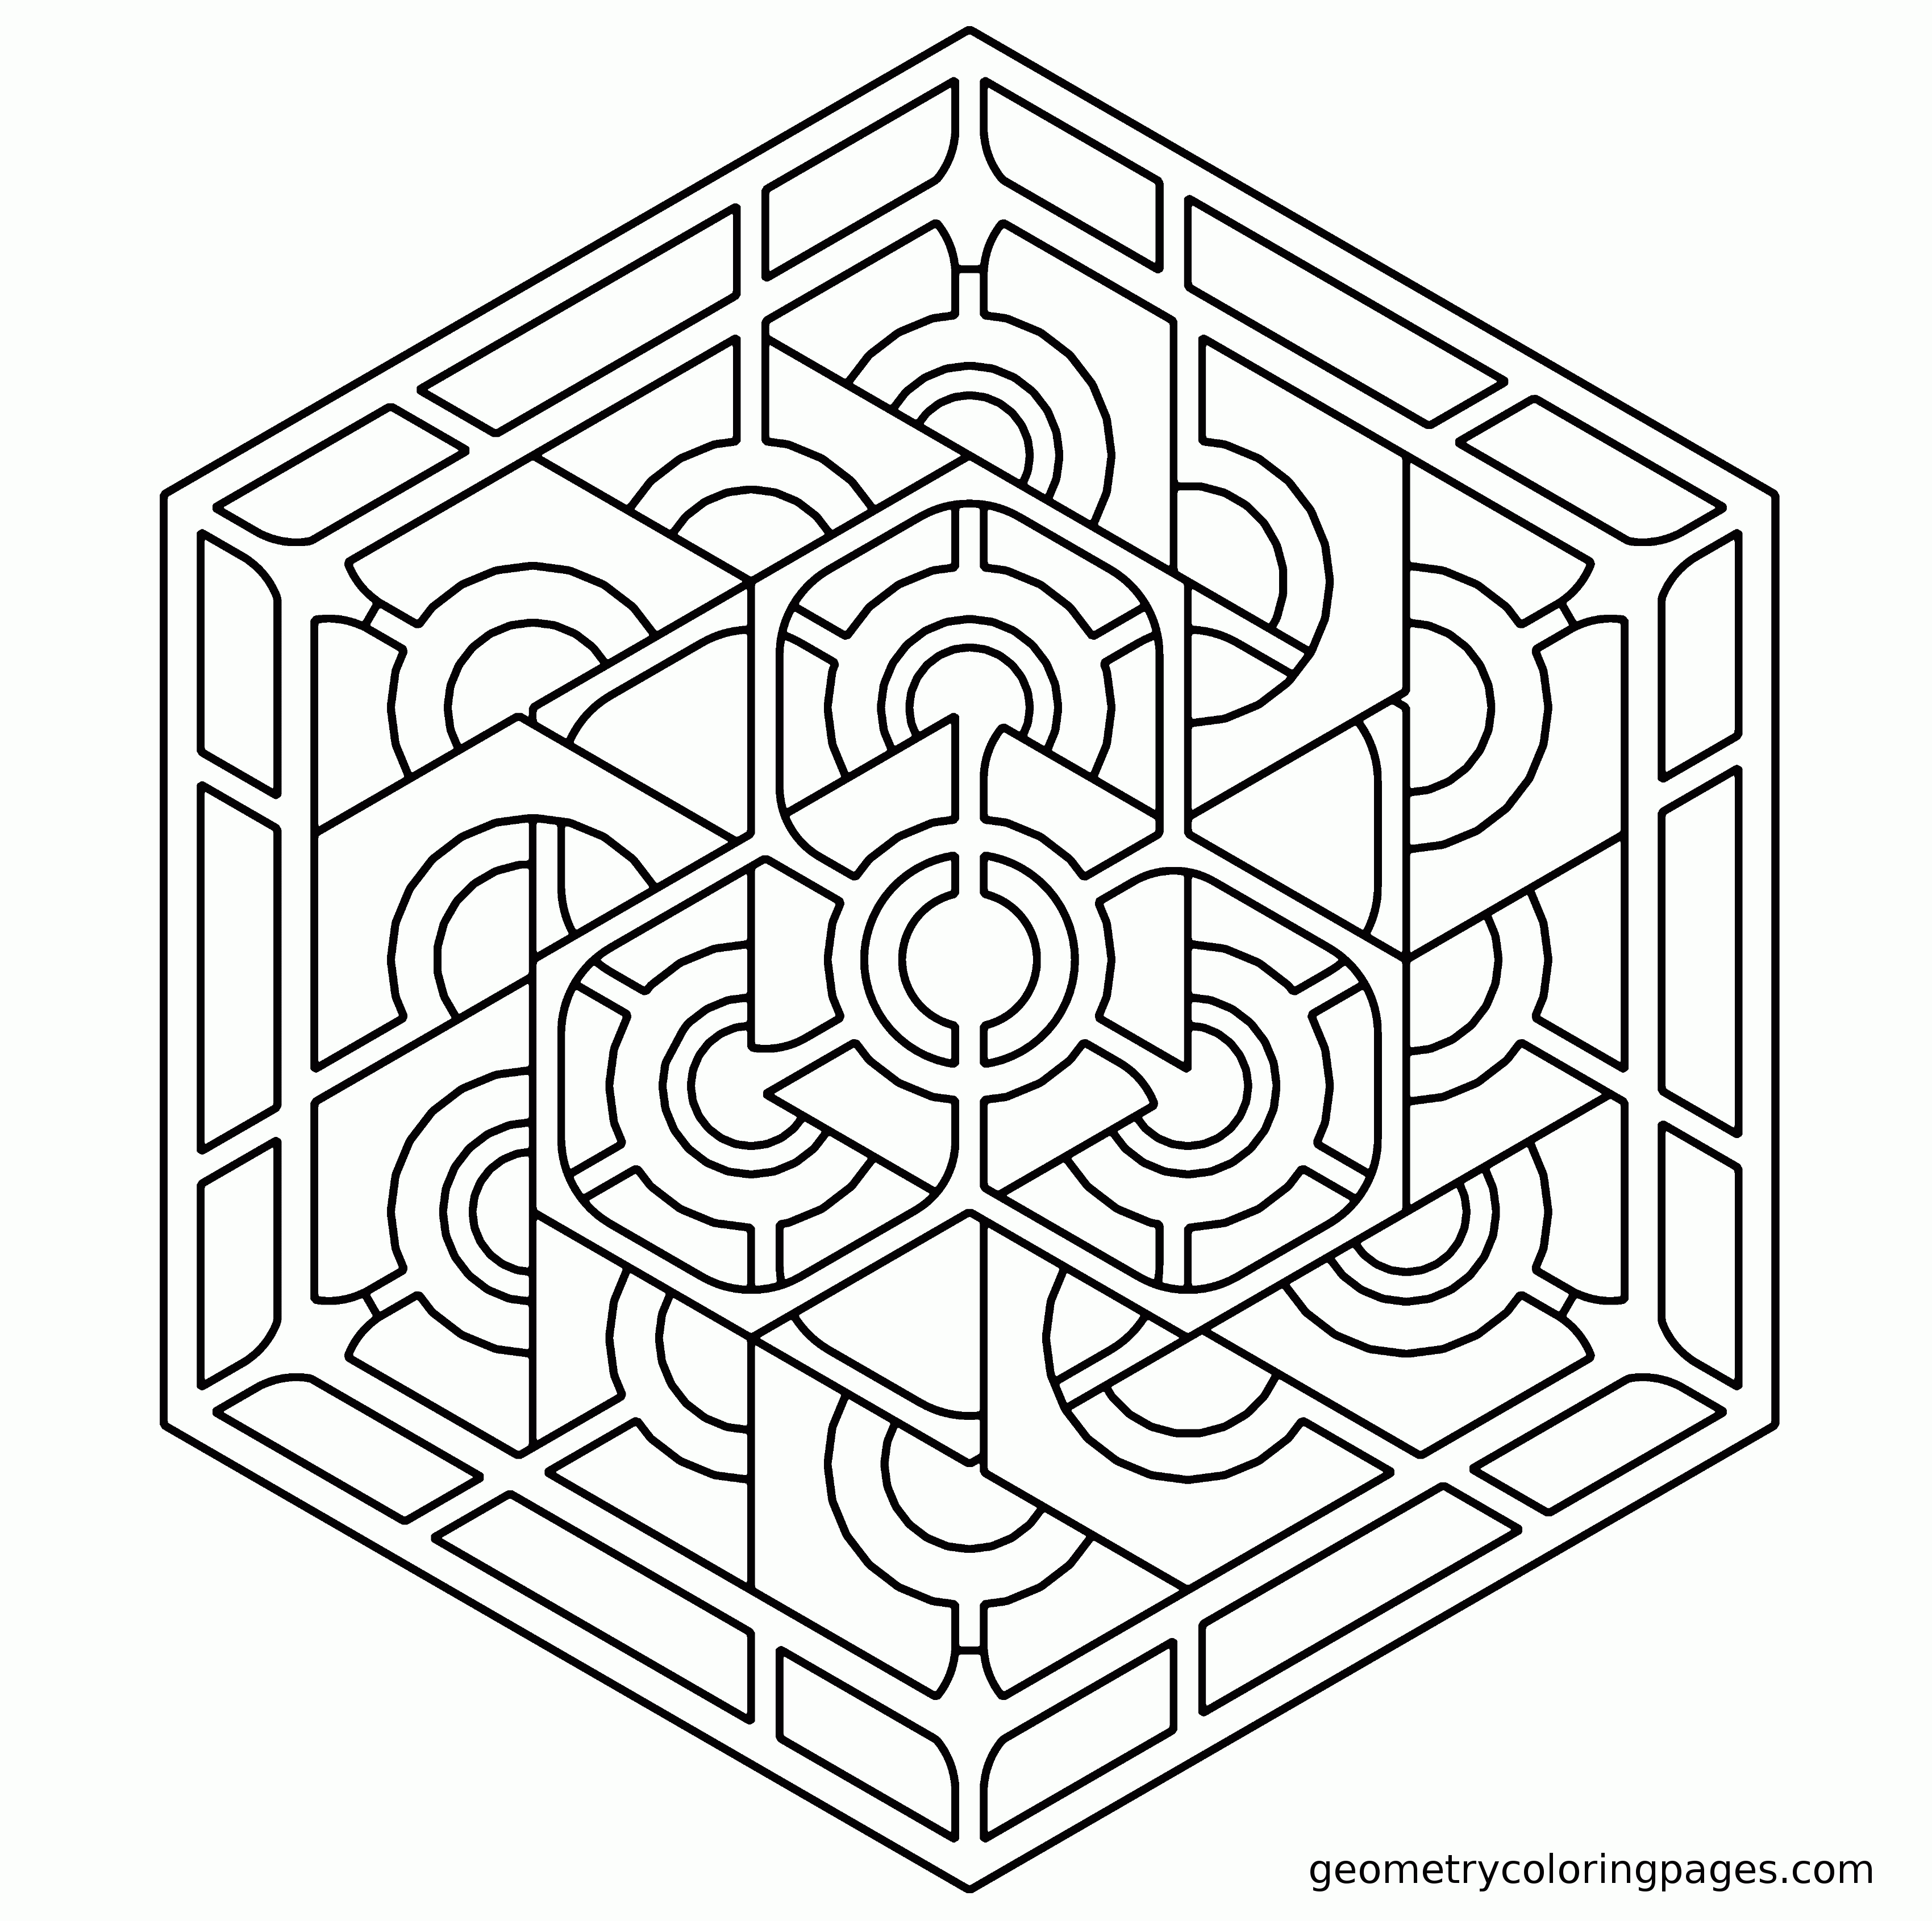 Geometric Pattern Coloring Pages For Adults - Coloring Home